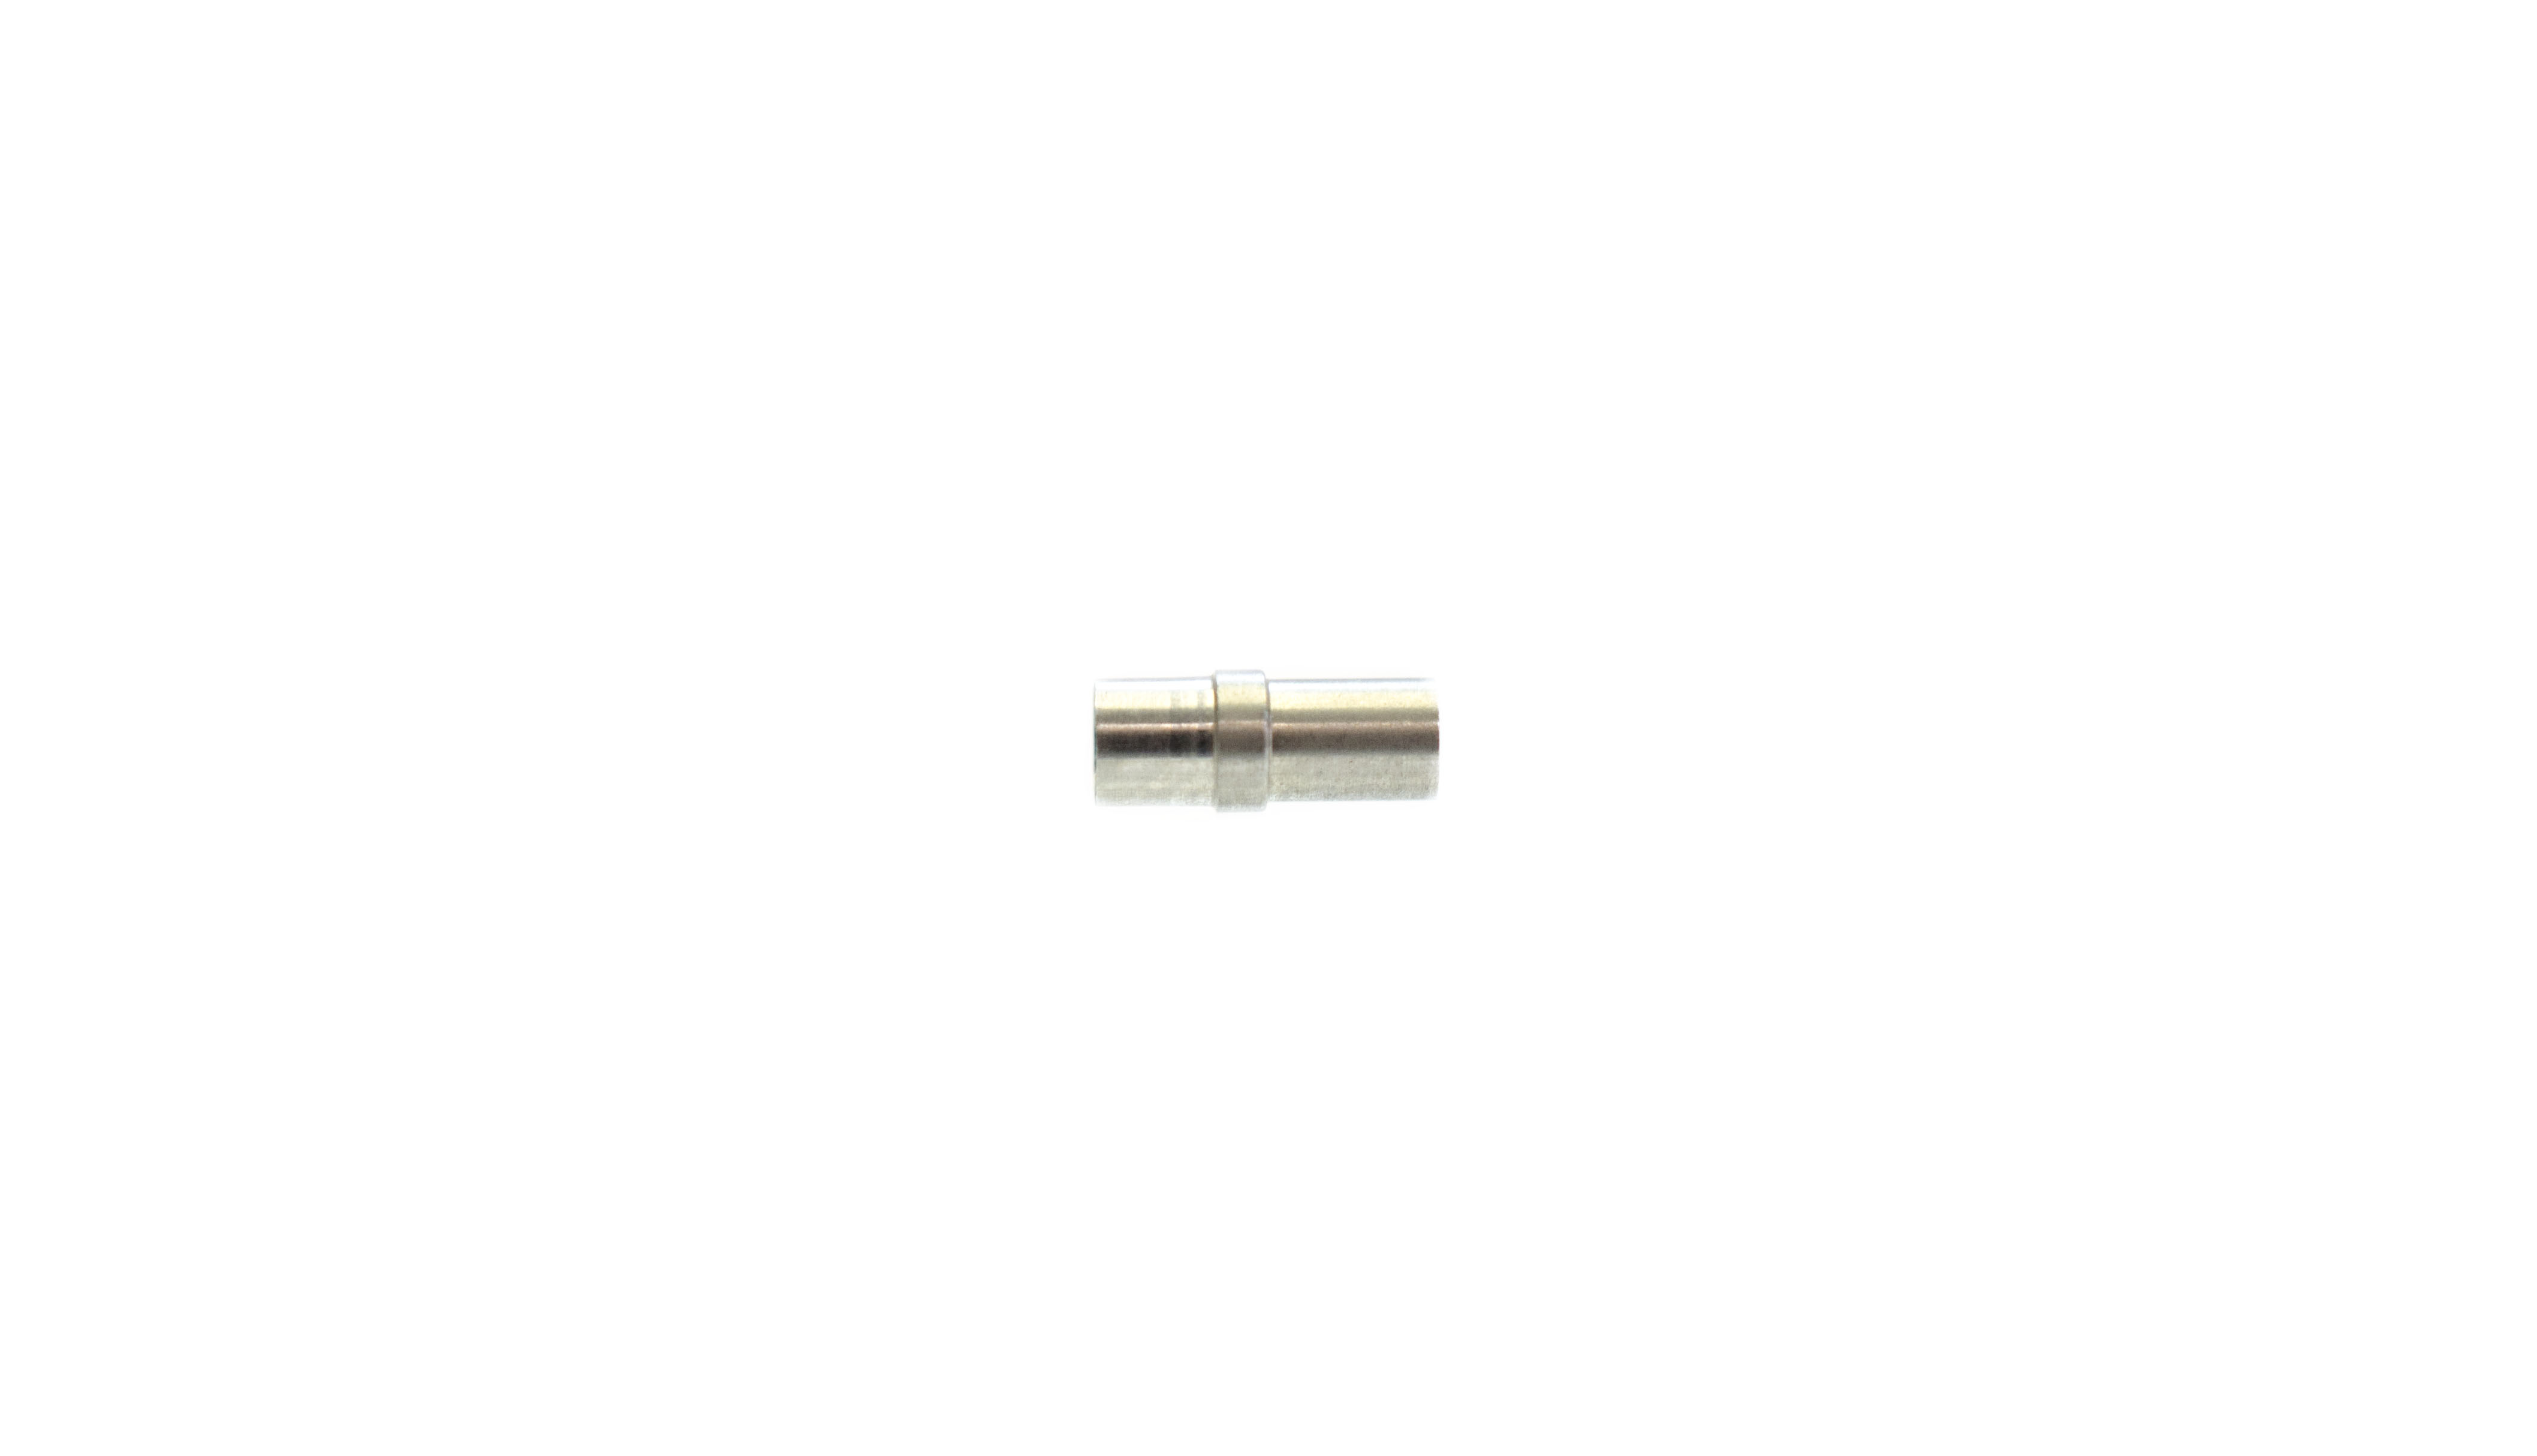 (OEM Compatible) Biopsy Channel Connector Sleeve (Insert) - BF-160, BF-P200, BF-P180 (2.00 mm)